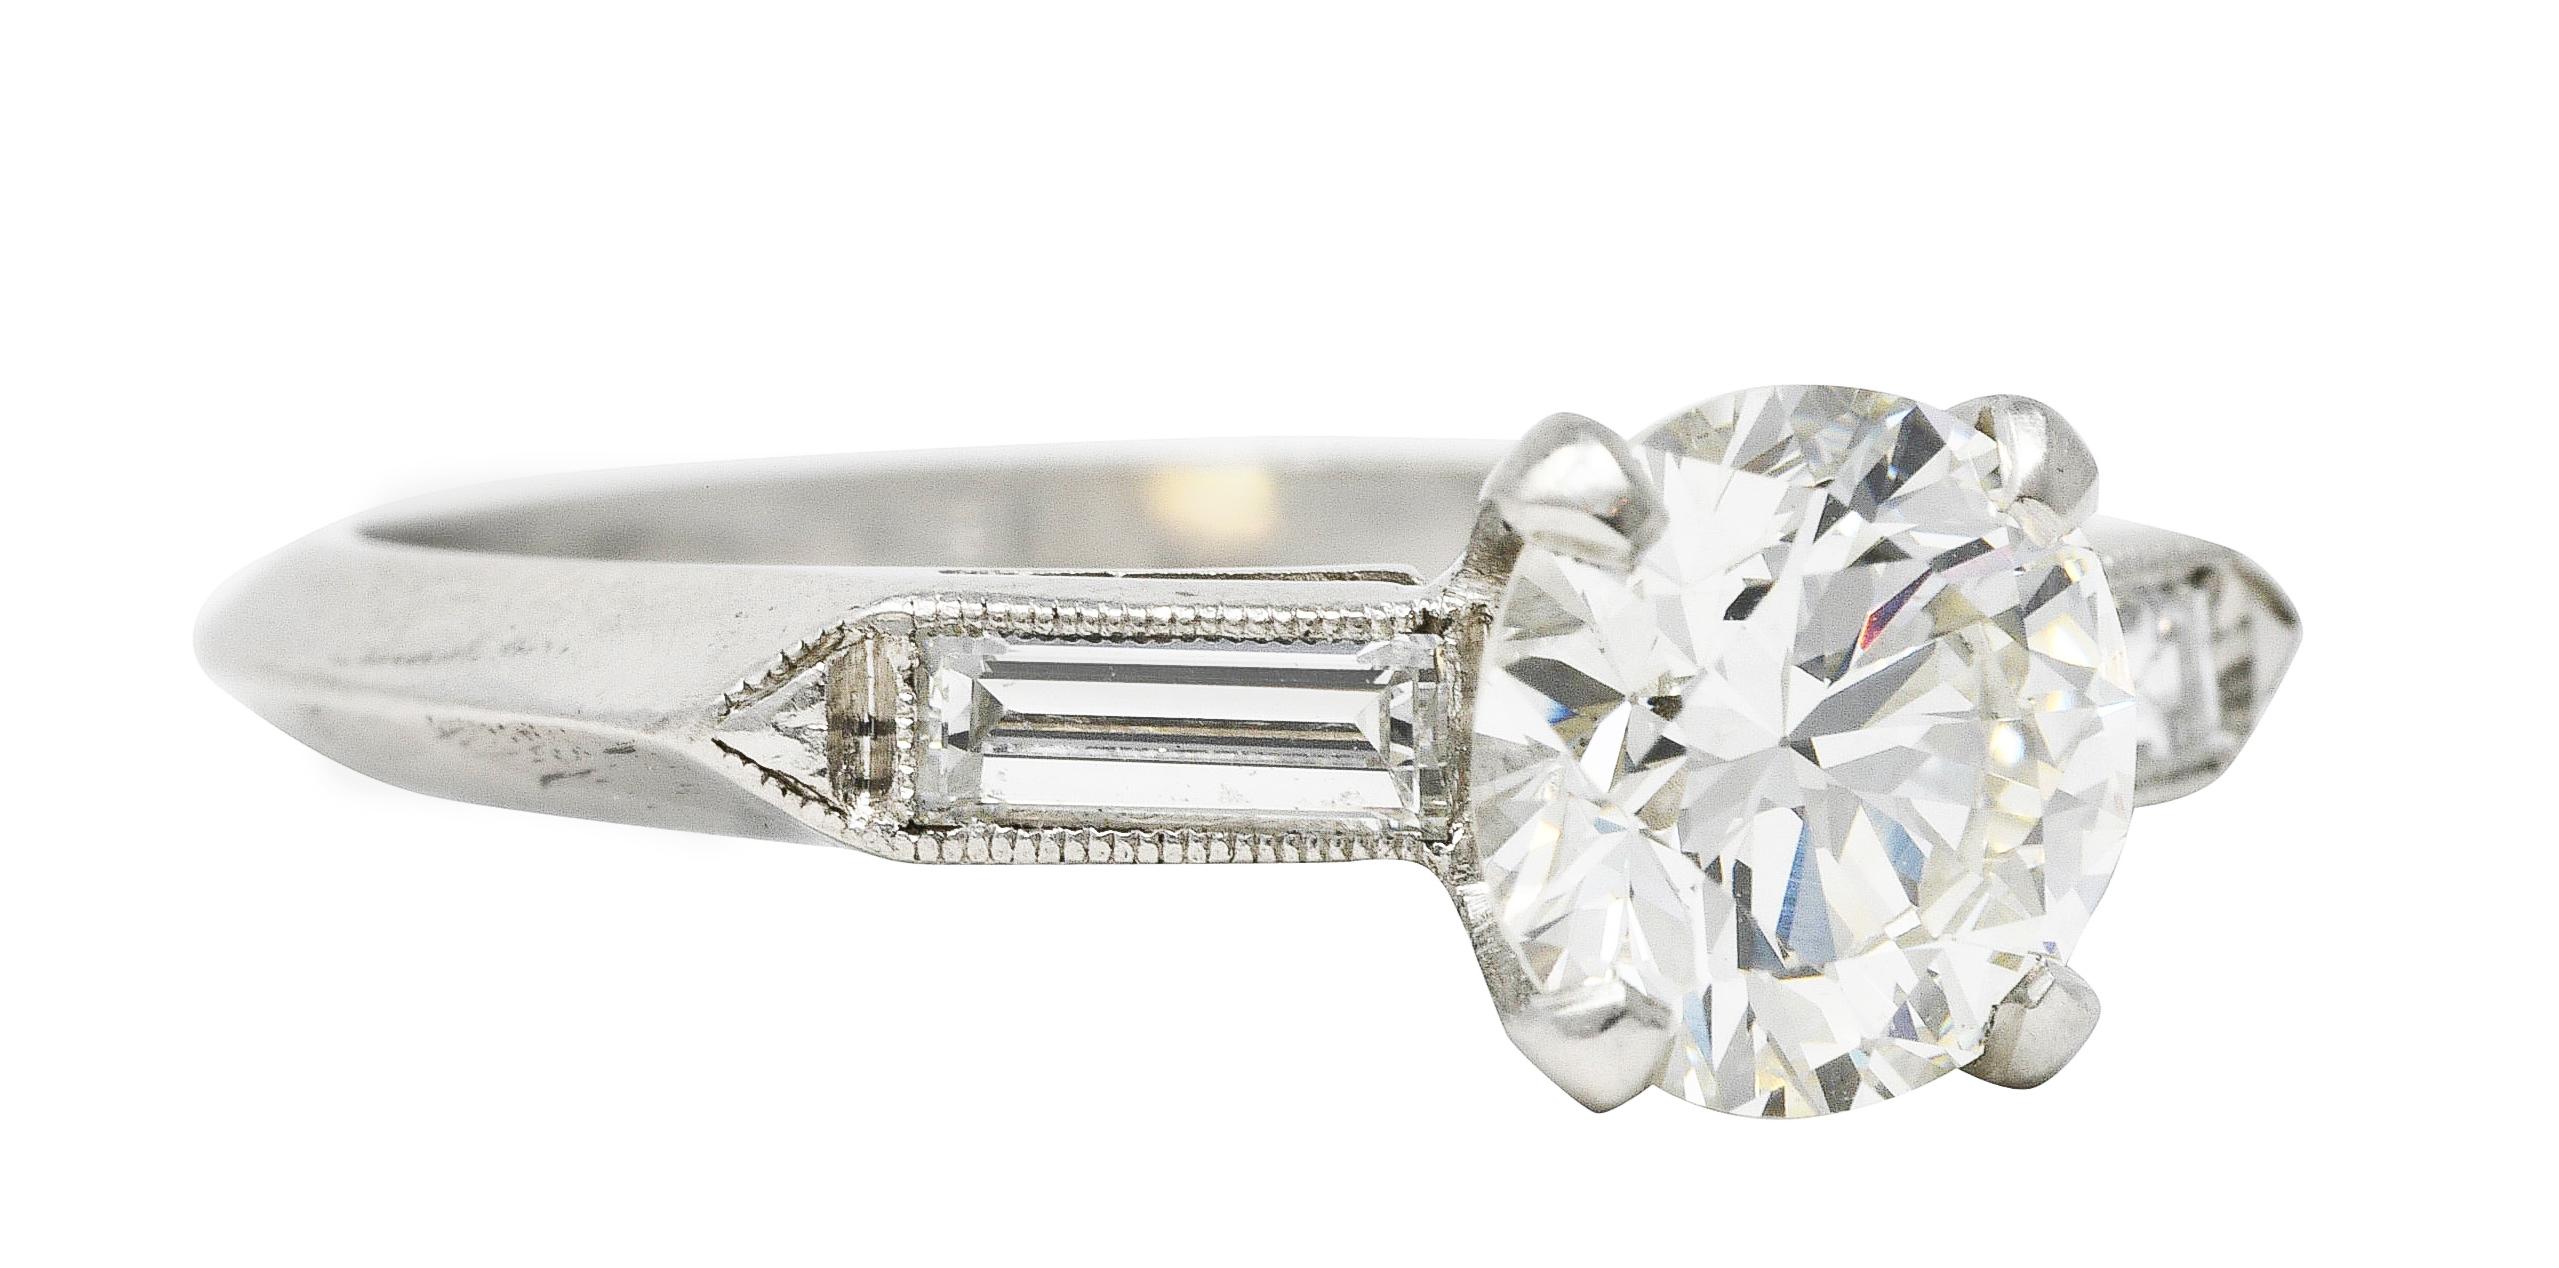 Ring centers a round brilliant cut diamond weighing 1.36 carats total - J in color with VVS1 clarity. Prong set in a basket and flanked by cathedral shoulders channel set with baguette cut diamonds. Weighing approximately 0.22 carat total - well